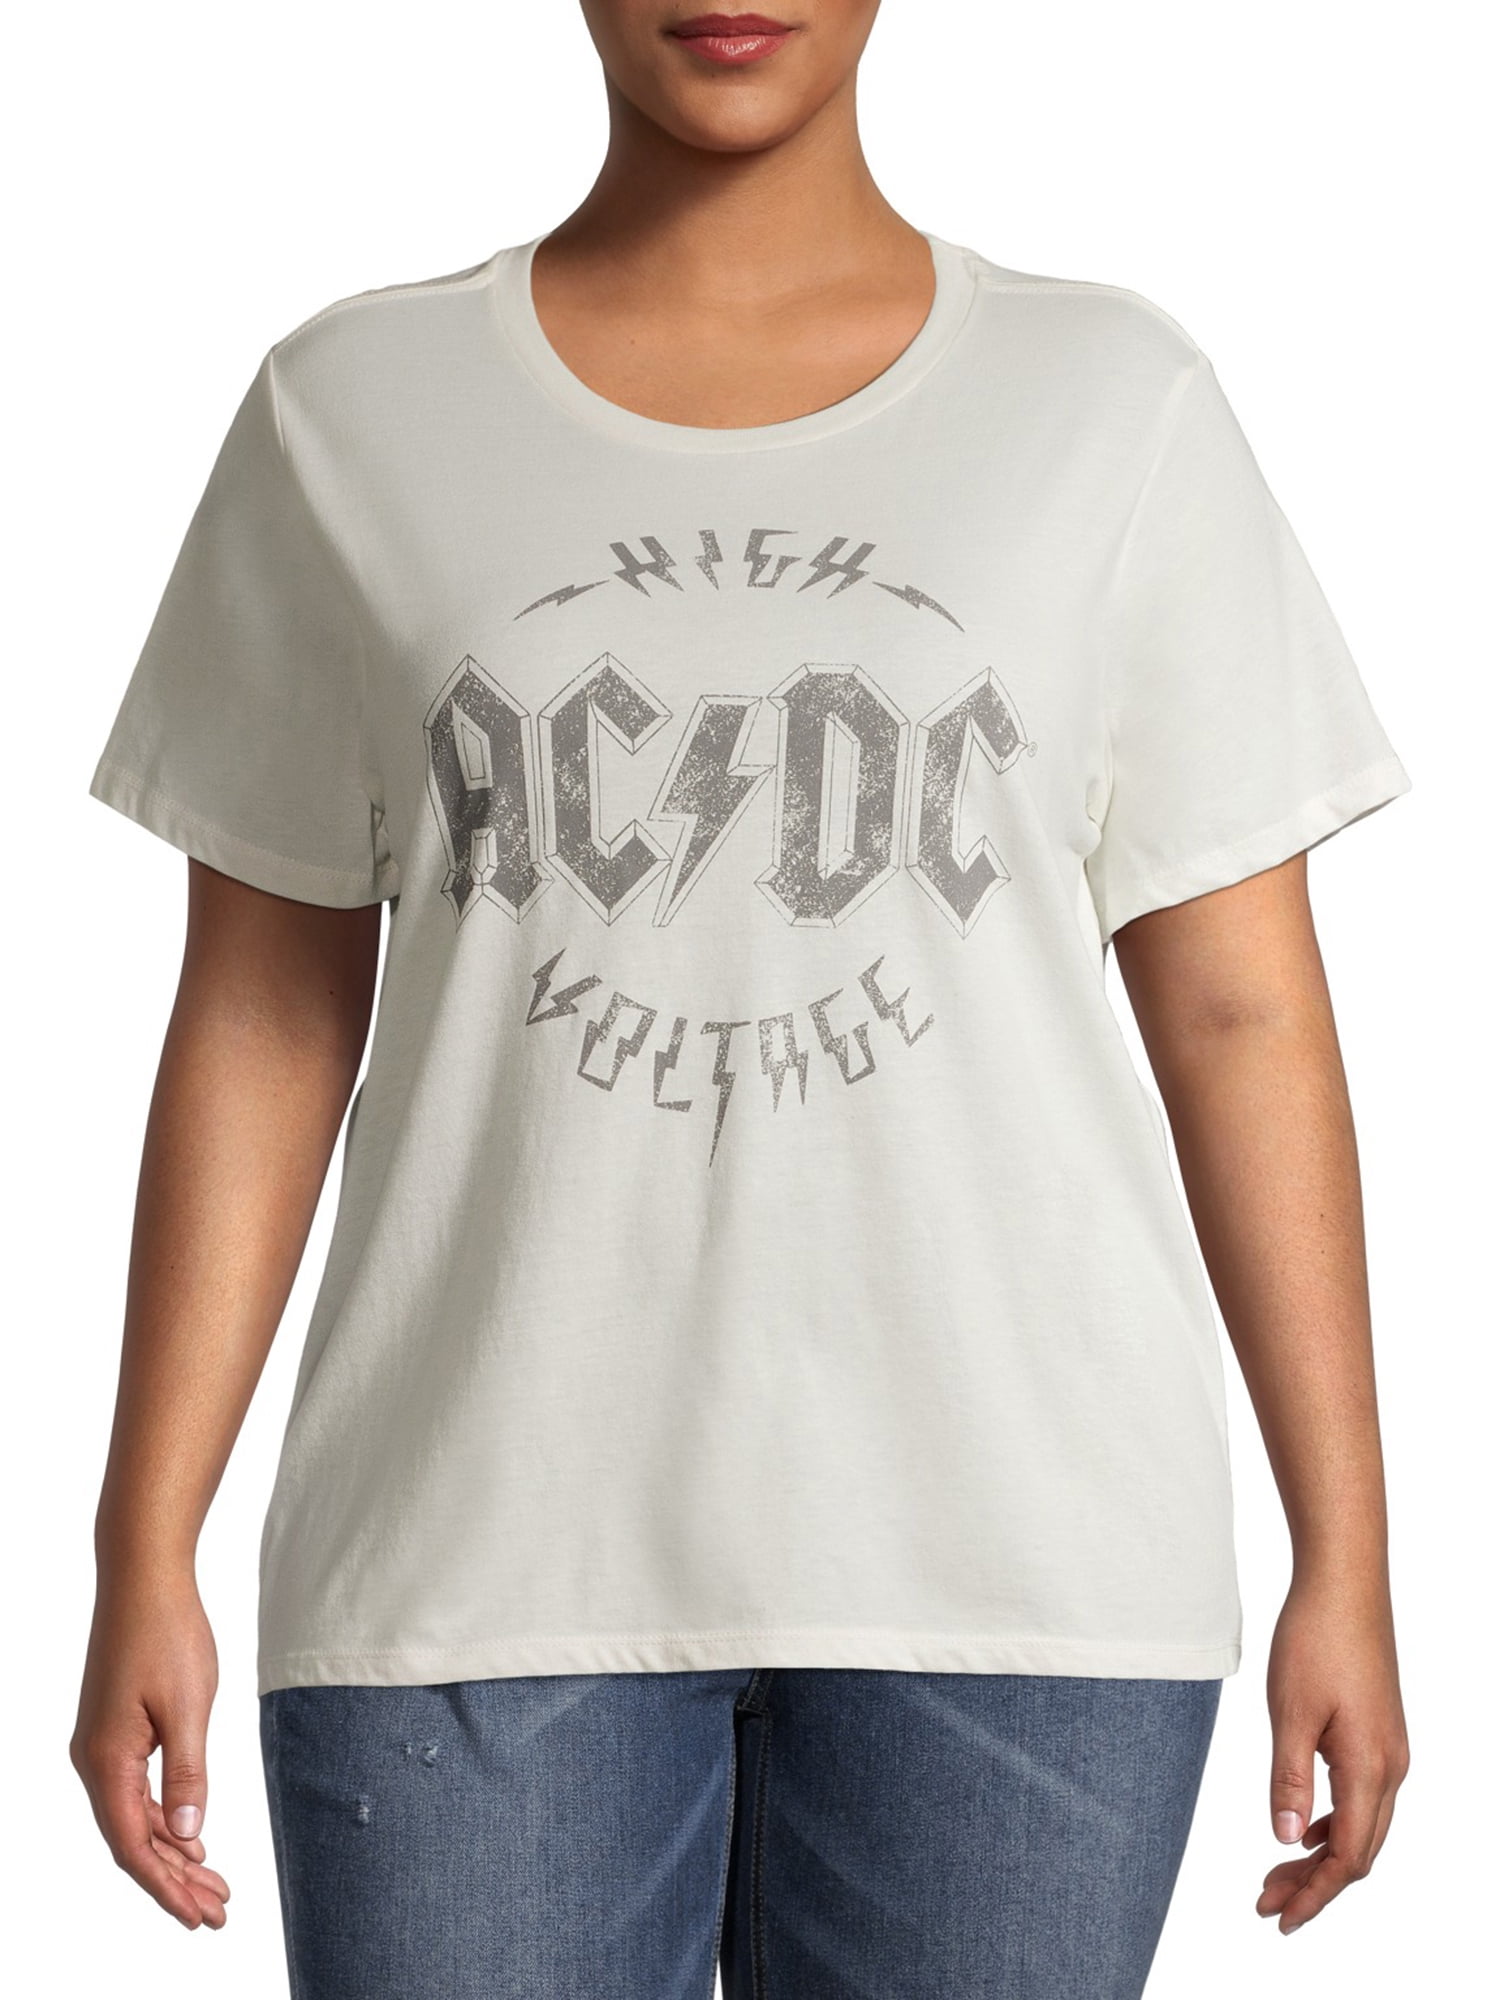 AC/DC High Voltage Womans Fitted T Shirt Heavy Metal Music 